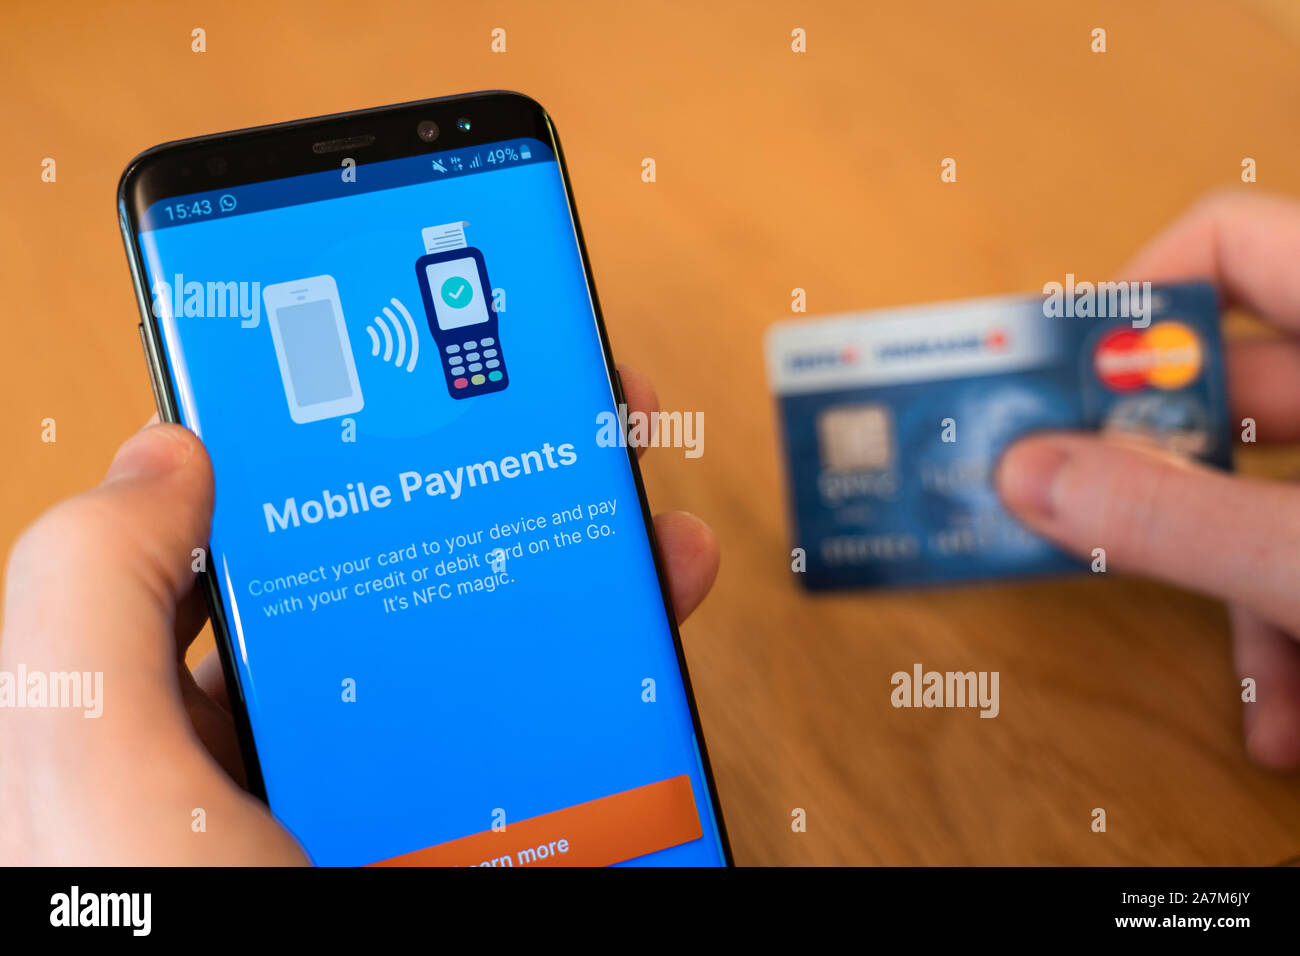 Using a mobile phone to make a credit card payment online. Concept - mobile payments and fraud Stock Photo